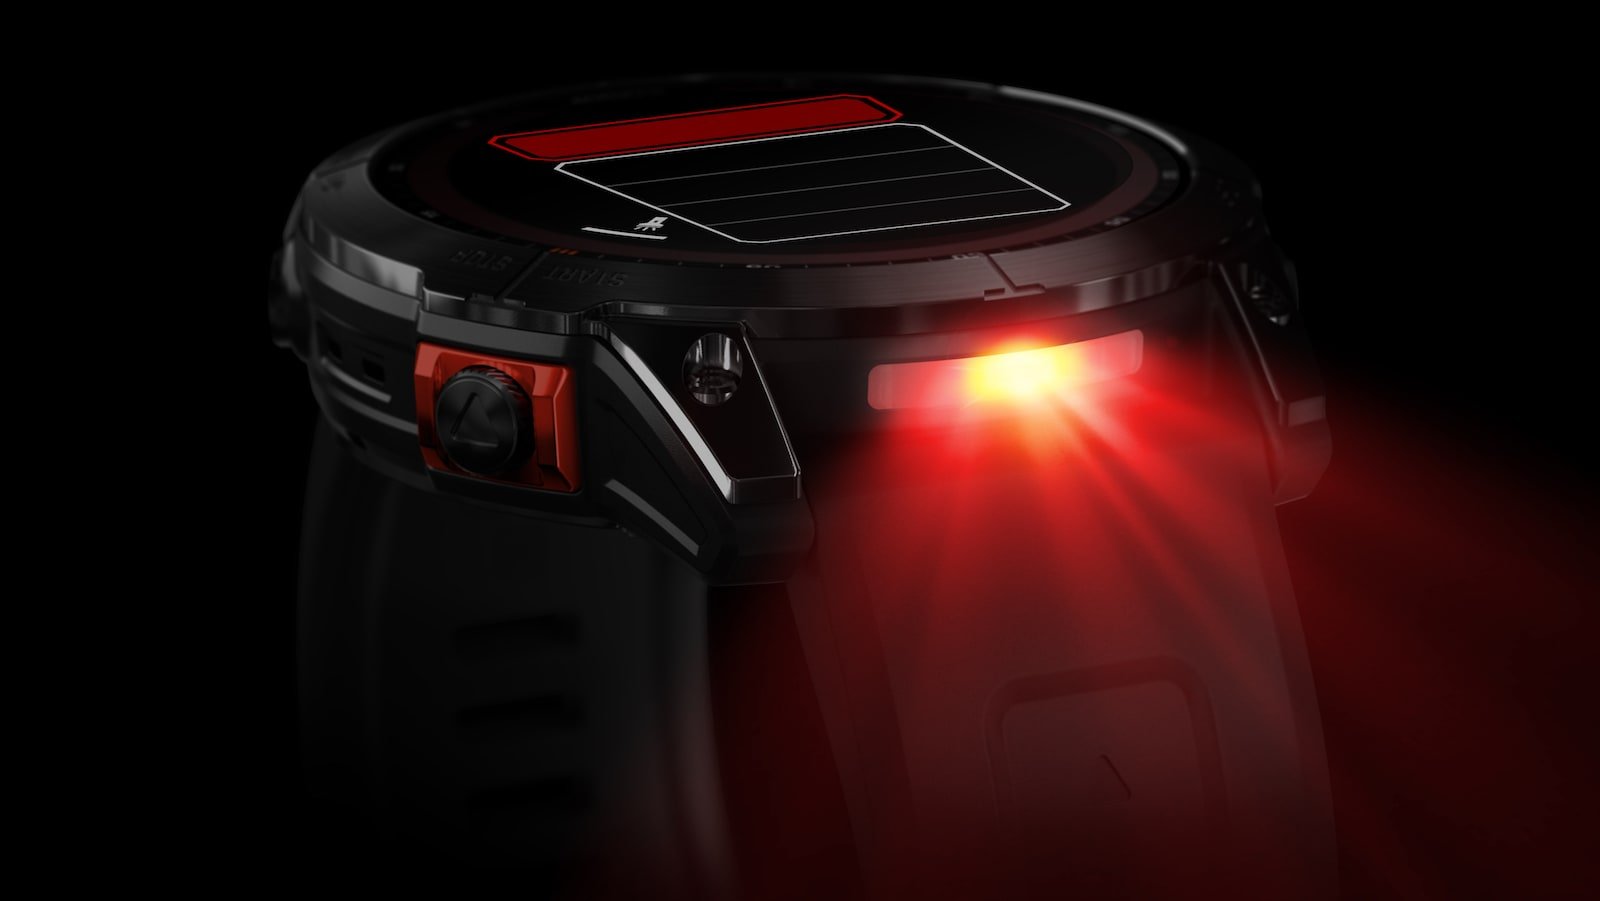 Garmin fēnix 7 series smartwatches feature a built-in LED flashlight and solar charging